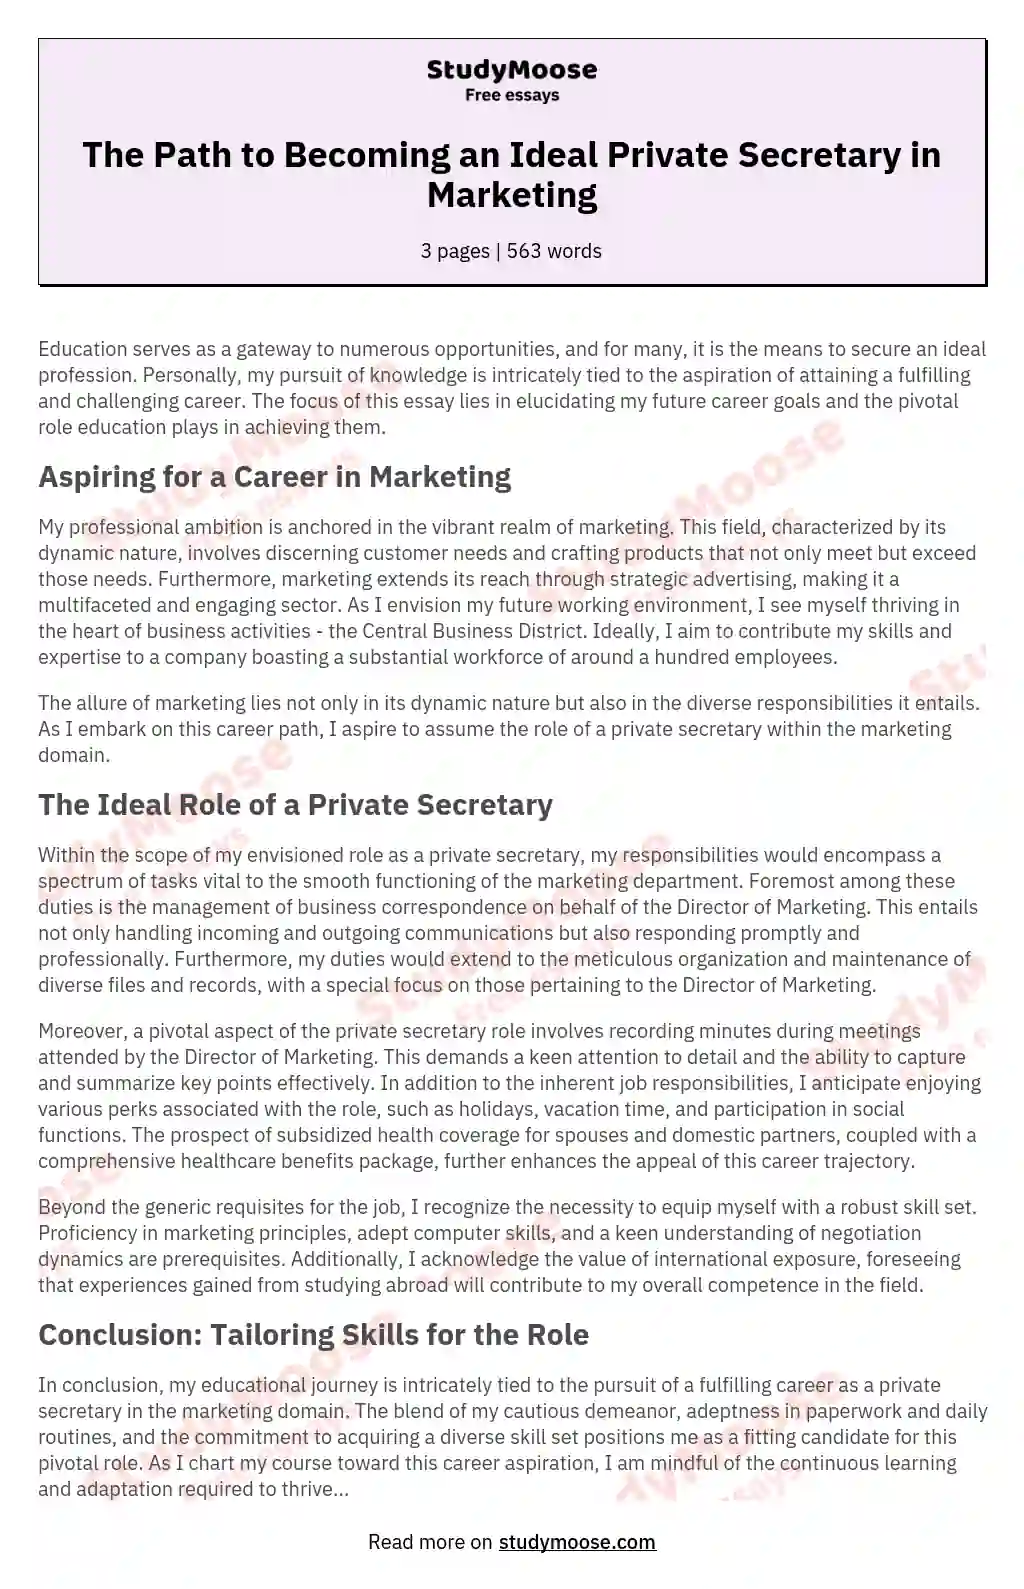 The Path to Becoming an Ideal Private Secretary in Marketing essay